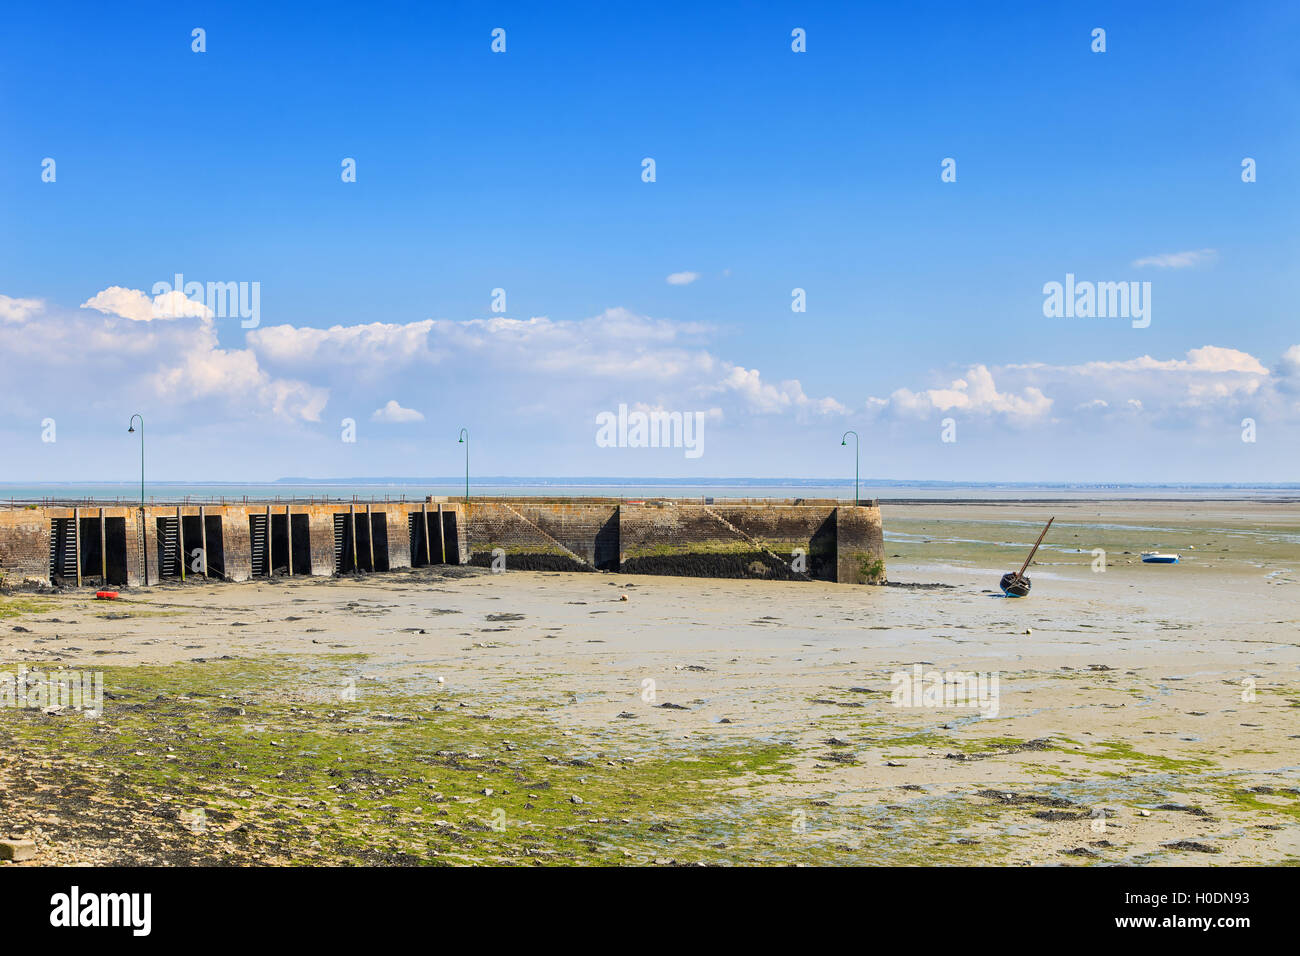 Low tide in Cancale fishing port. Pier and boat. Brittany, France. Europe. Stock Photo